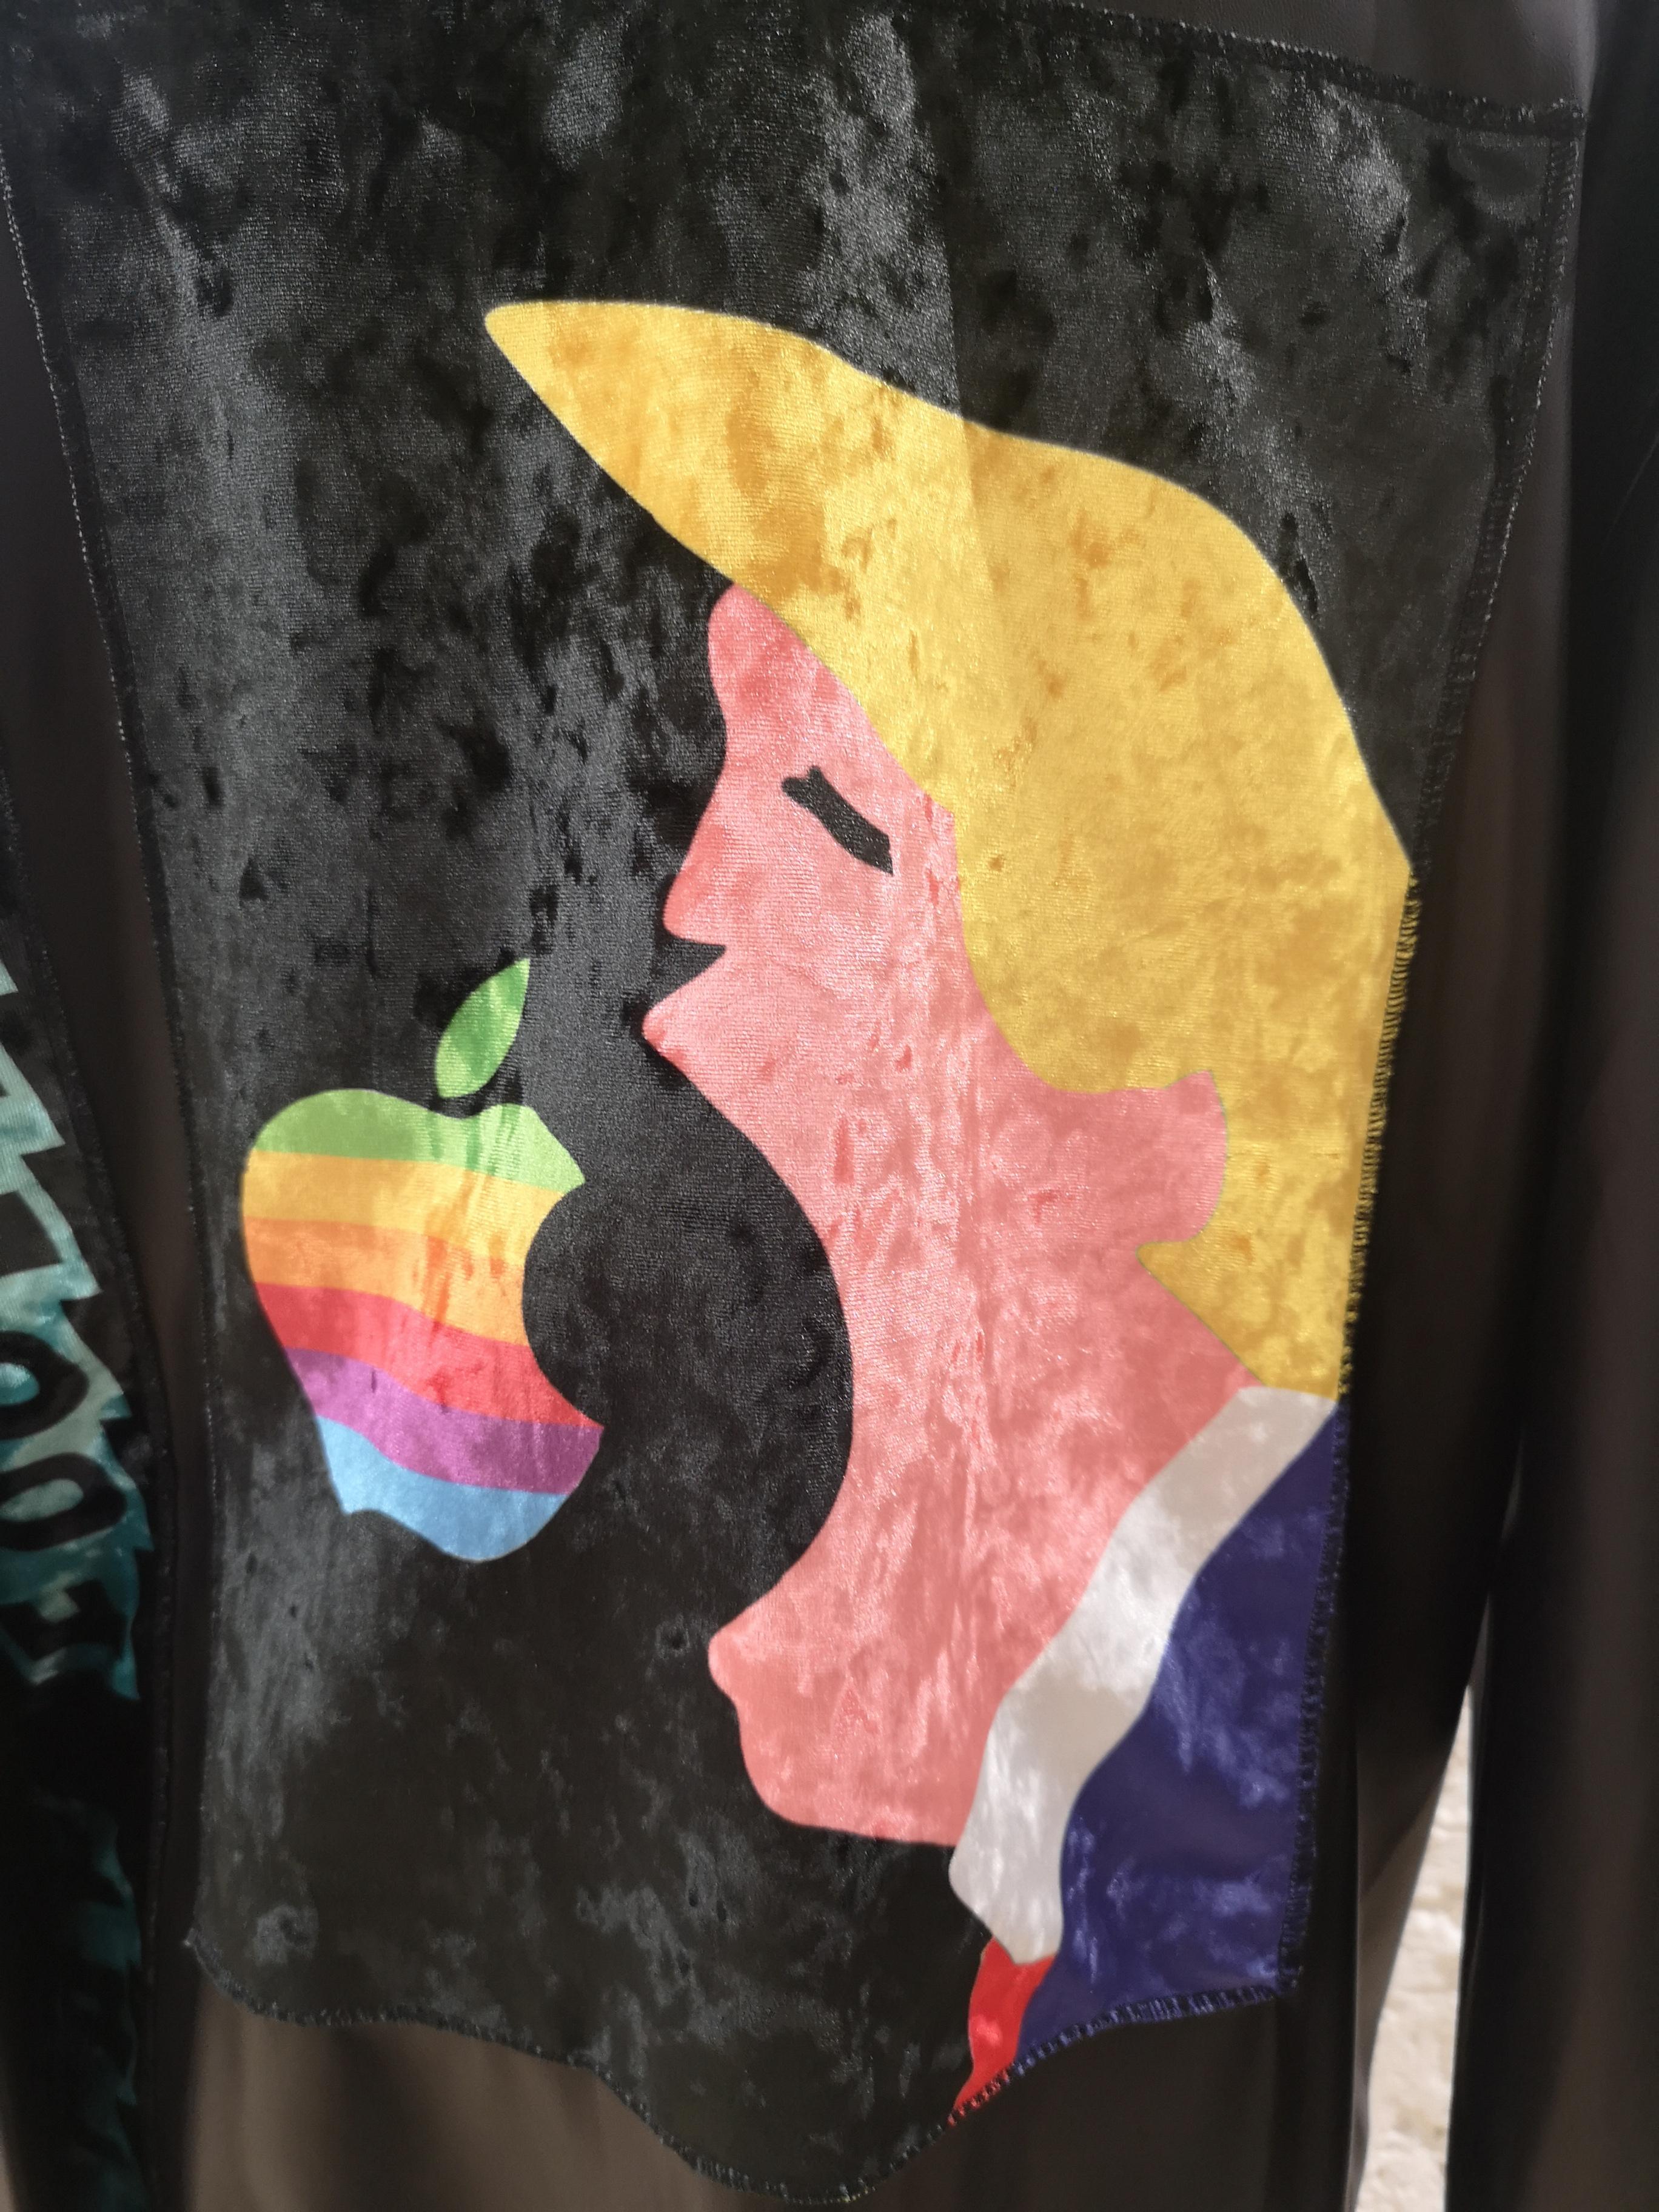 Kueen Eco leather Trump hoodie / sweater
Trump eating apple on the back
totally made in italy 
size M/L